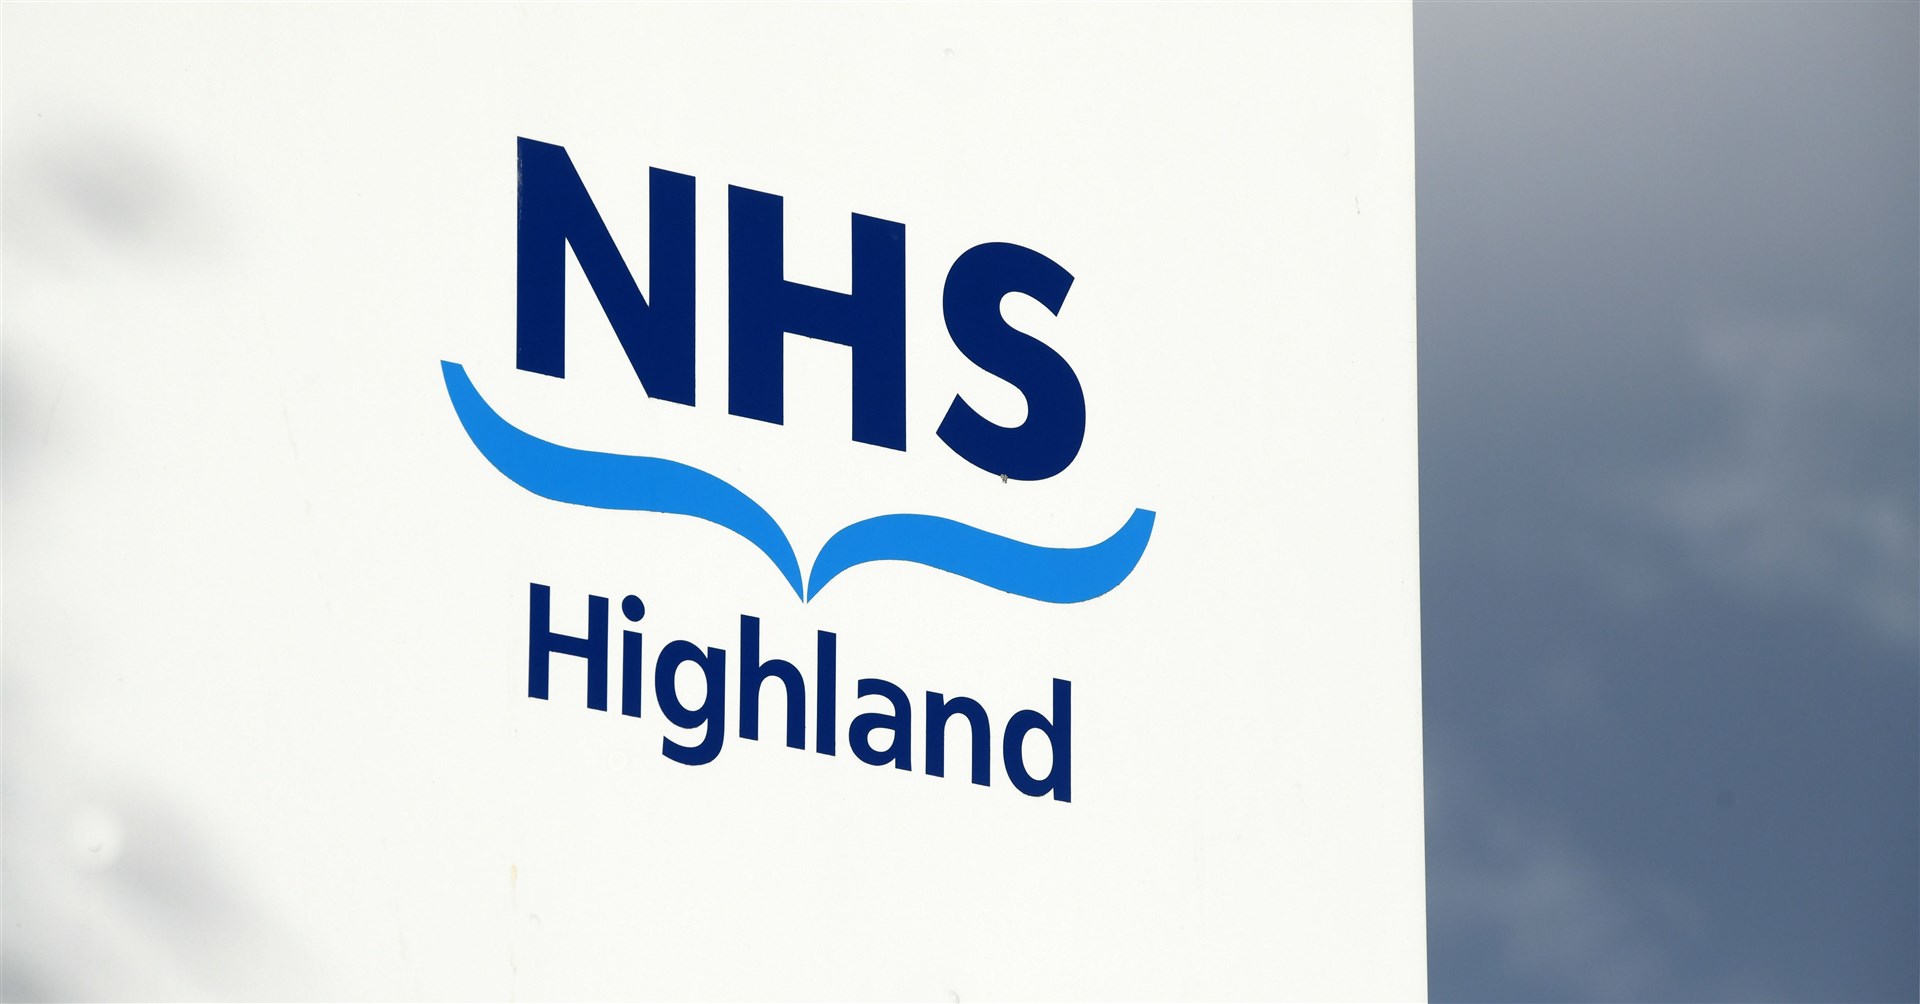 NHS Highland is looking for people to apply for its Care Reserves initiative.